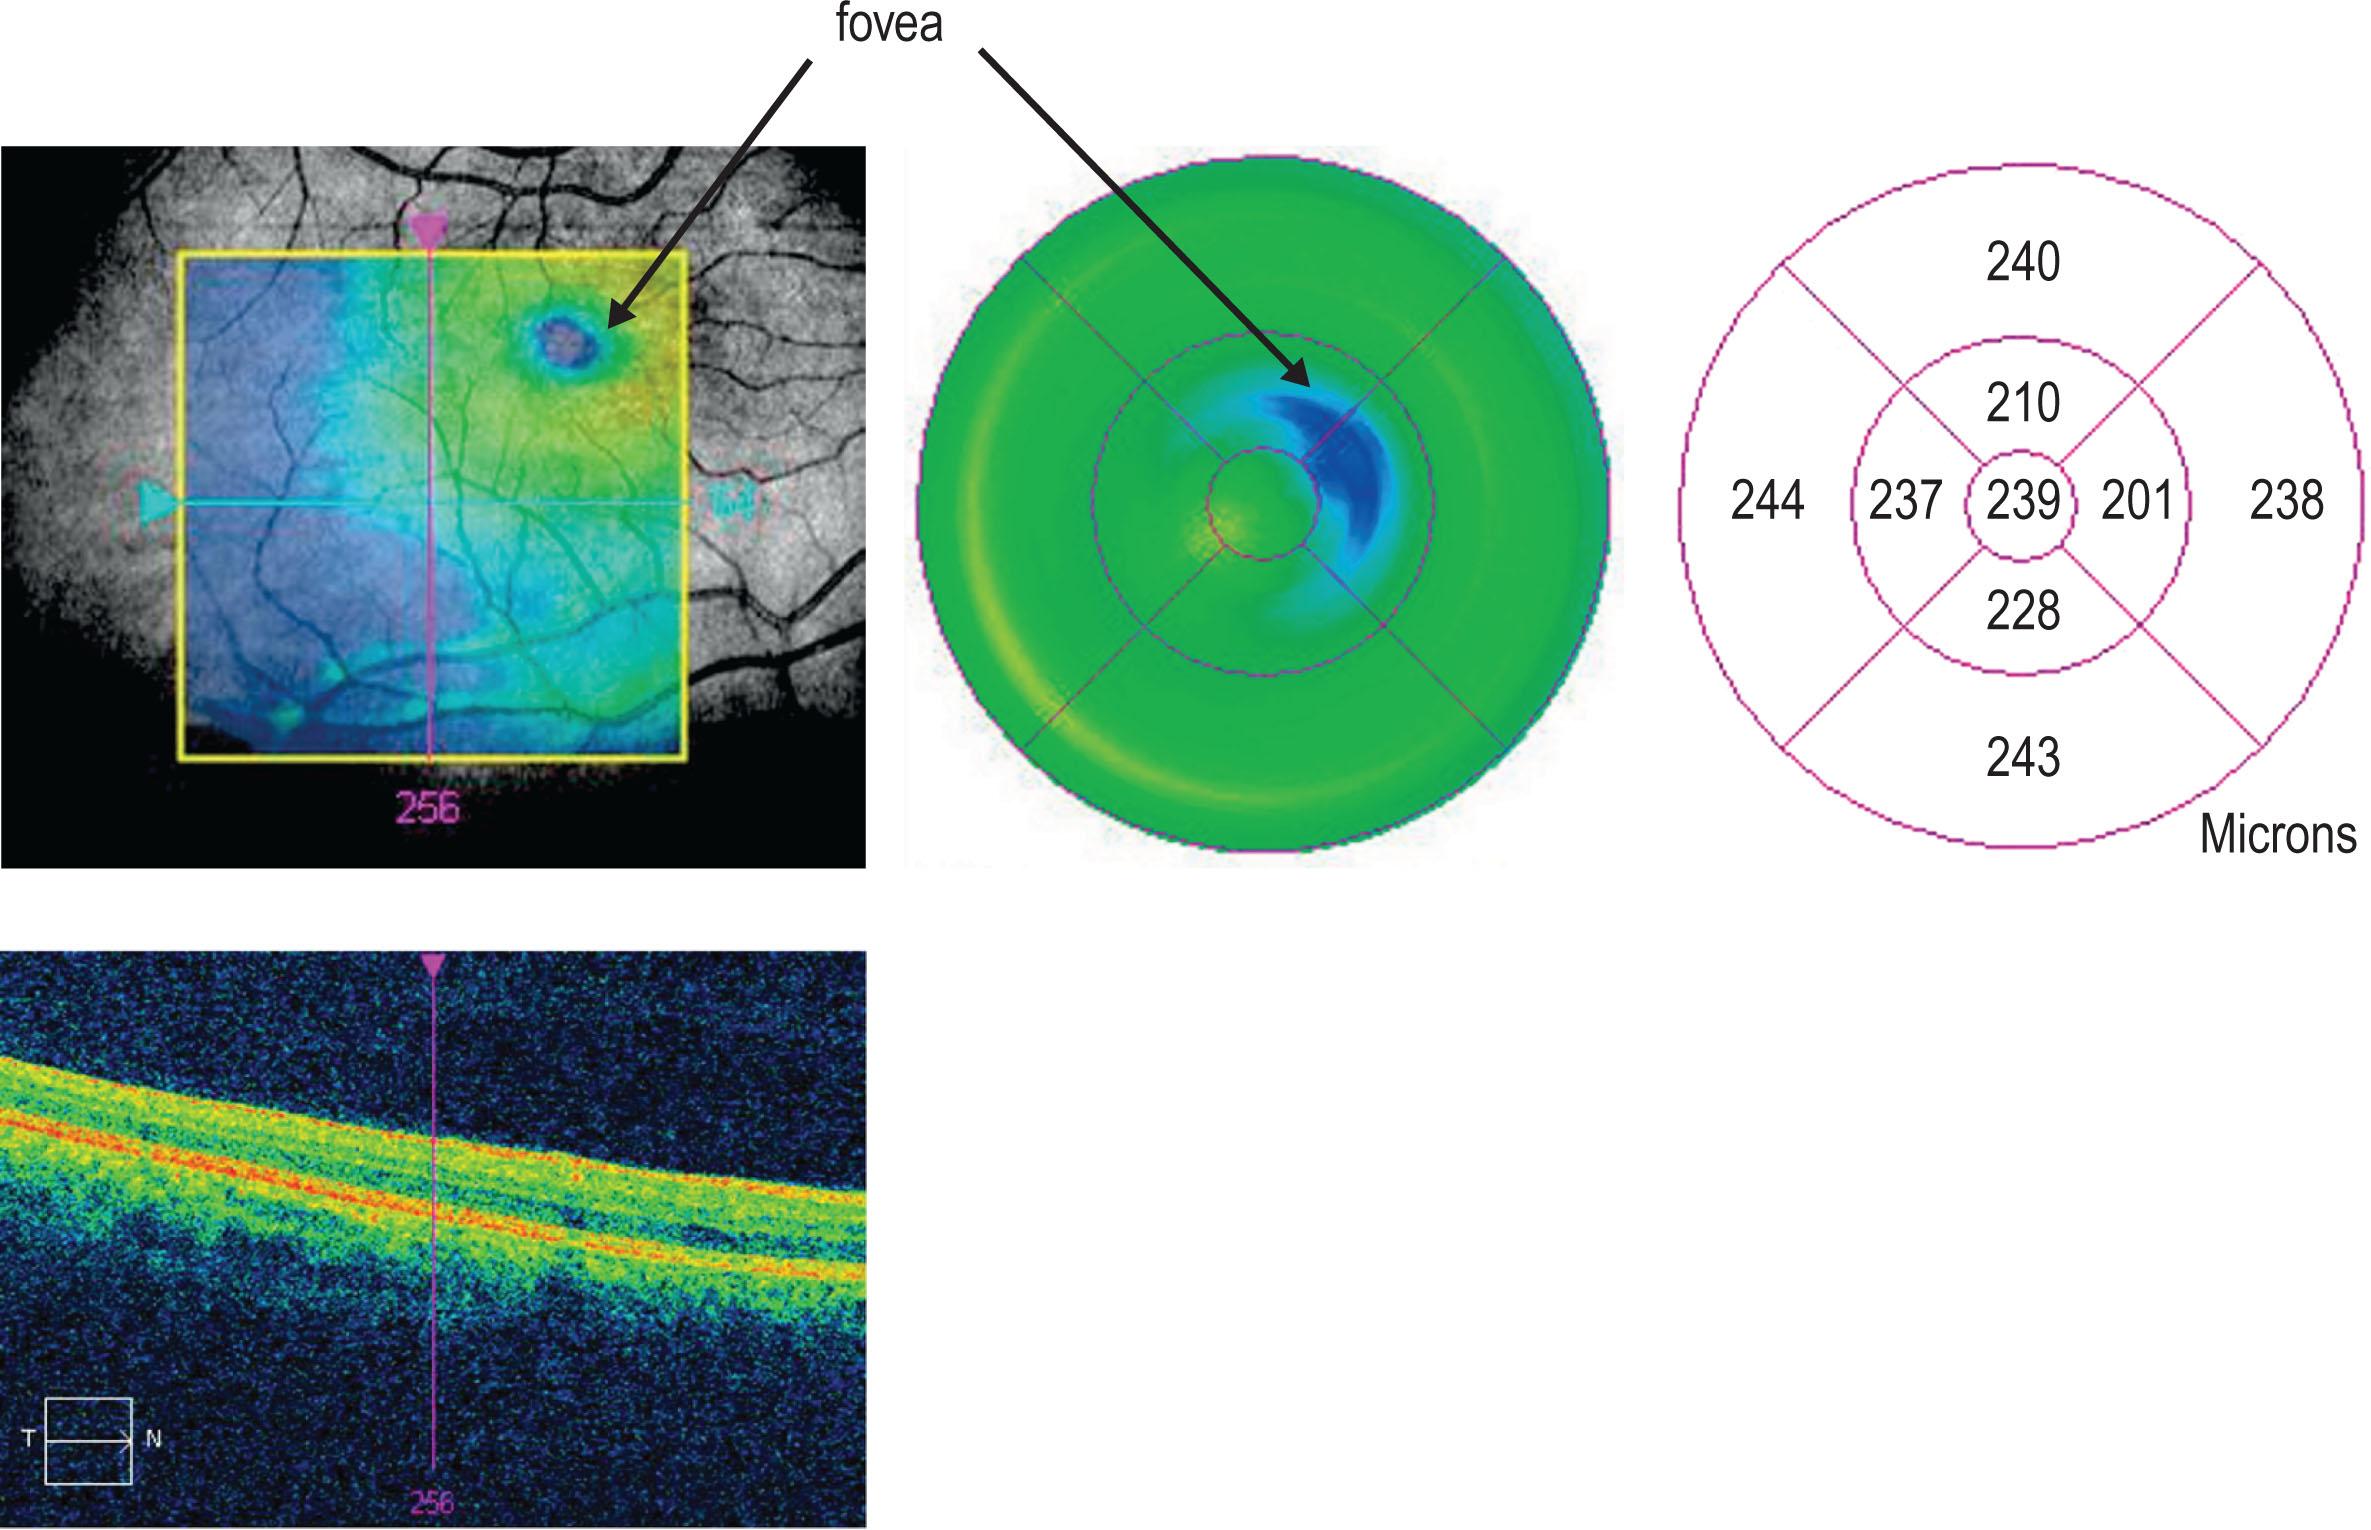 Figure 3.1.3, The macular map shows the thinnest part of the macula eccentric to the center of the Early Treatment Diabetic Retinopathy Study grid and the rendered fundus image. Note the absence of the foveal pit in the center of the line scan.